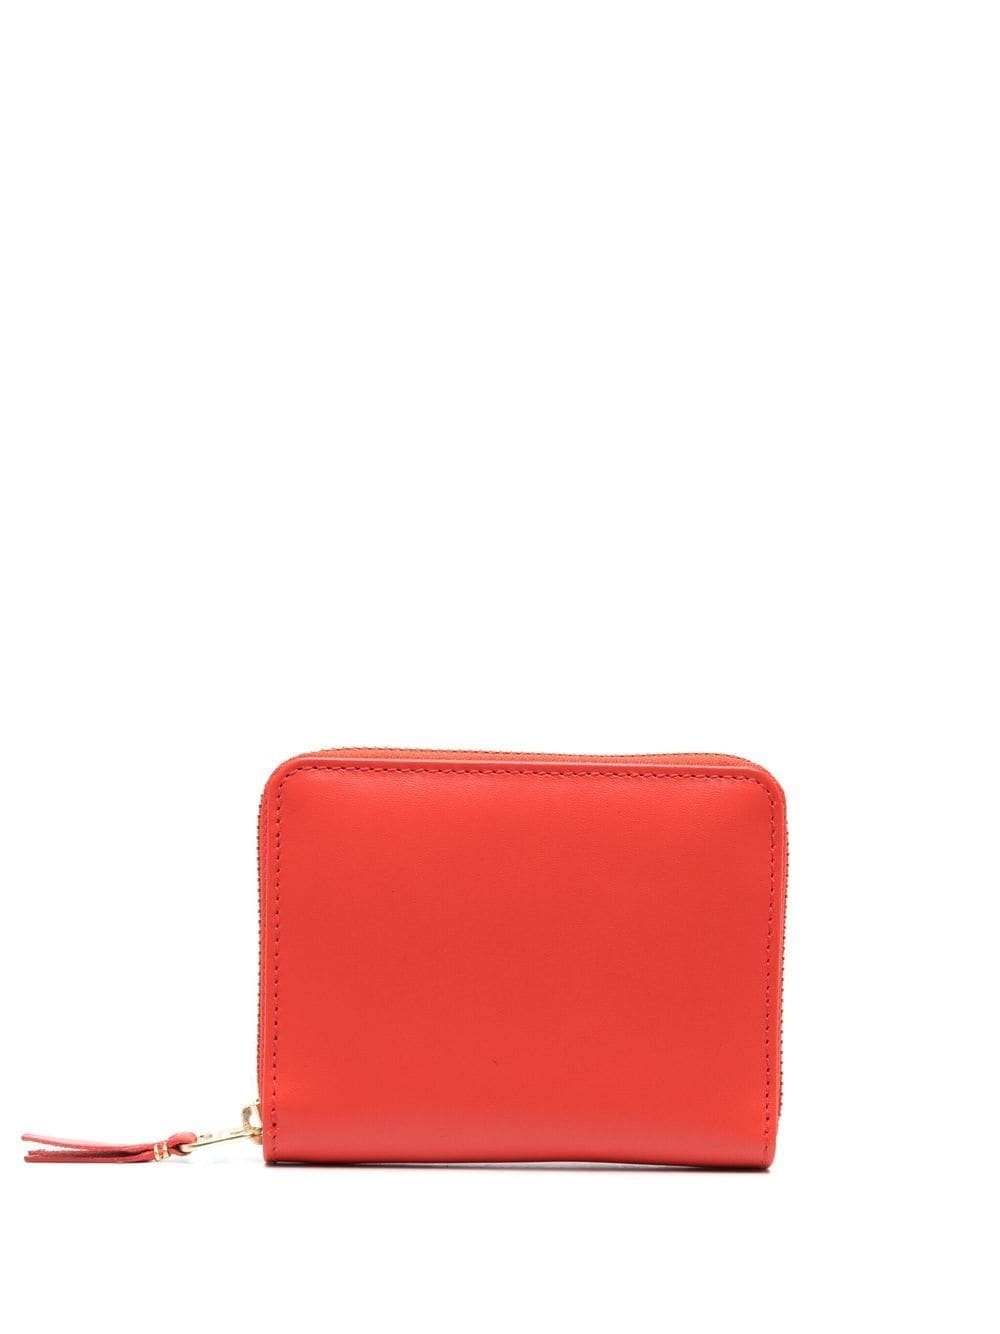 zip-up leather purse - 1